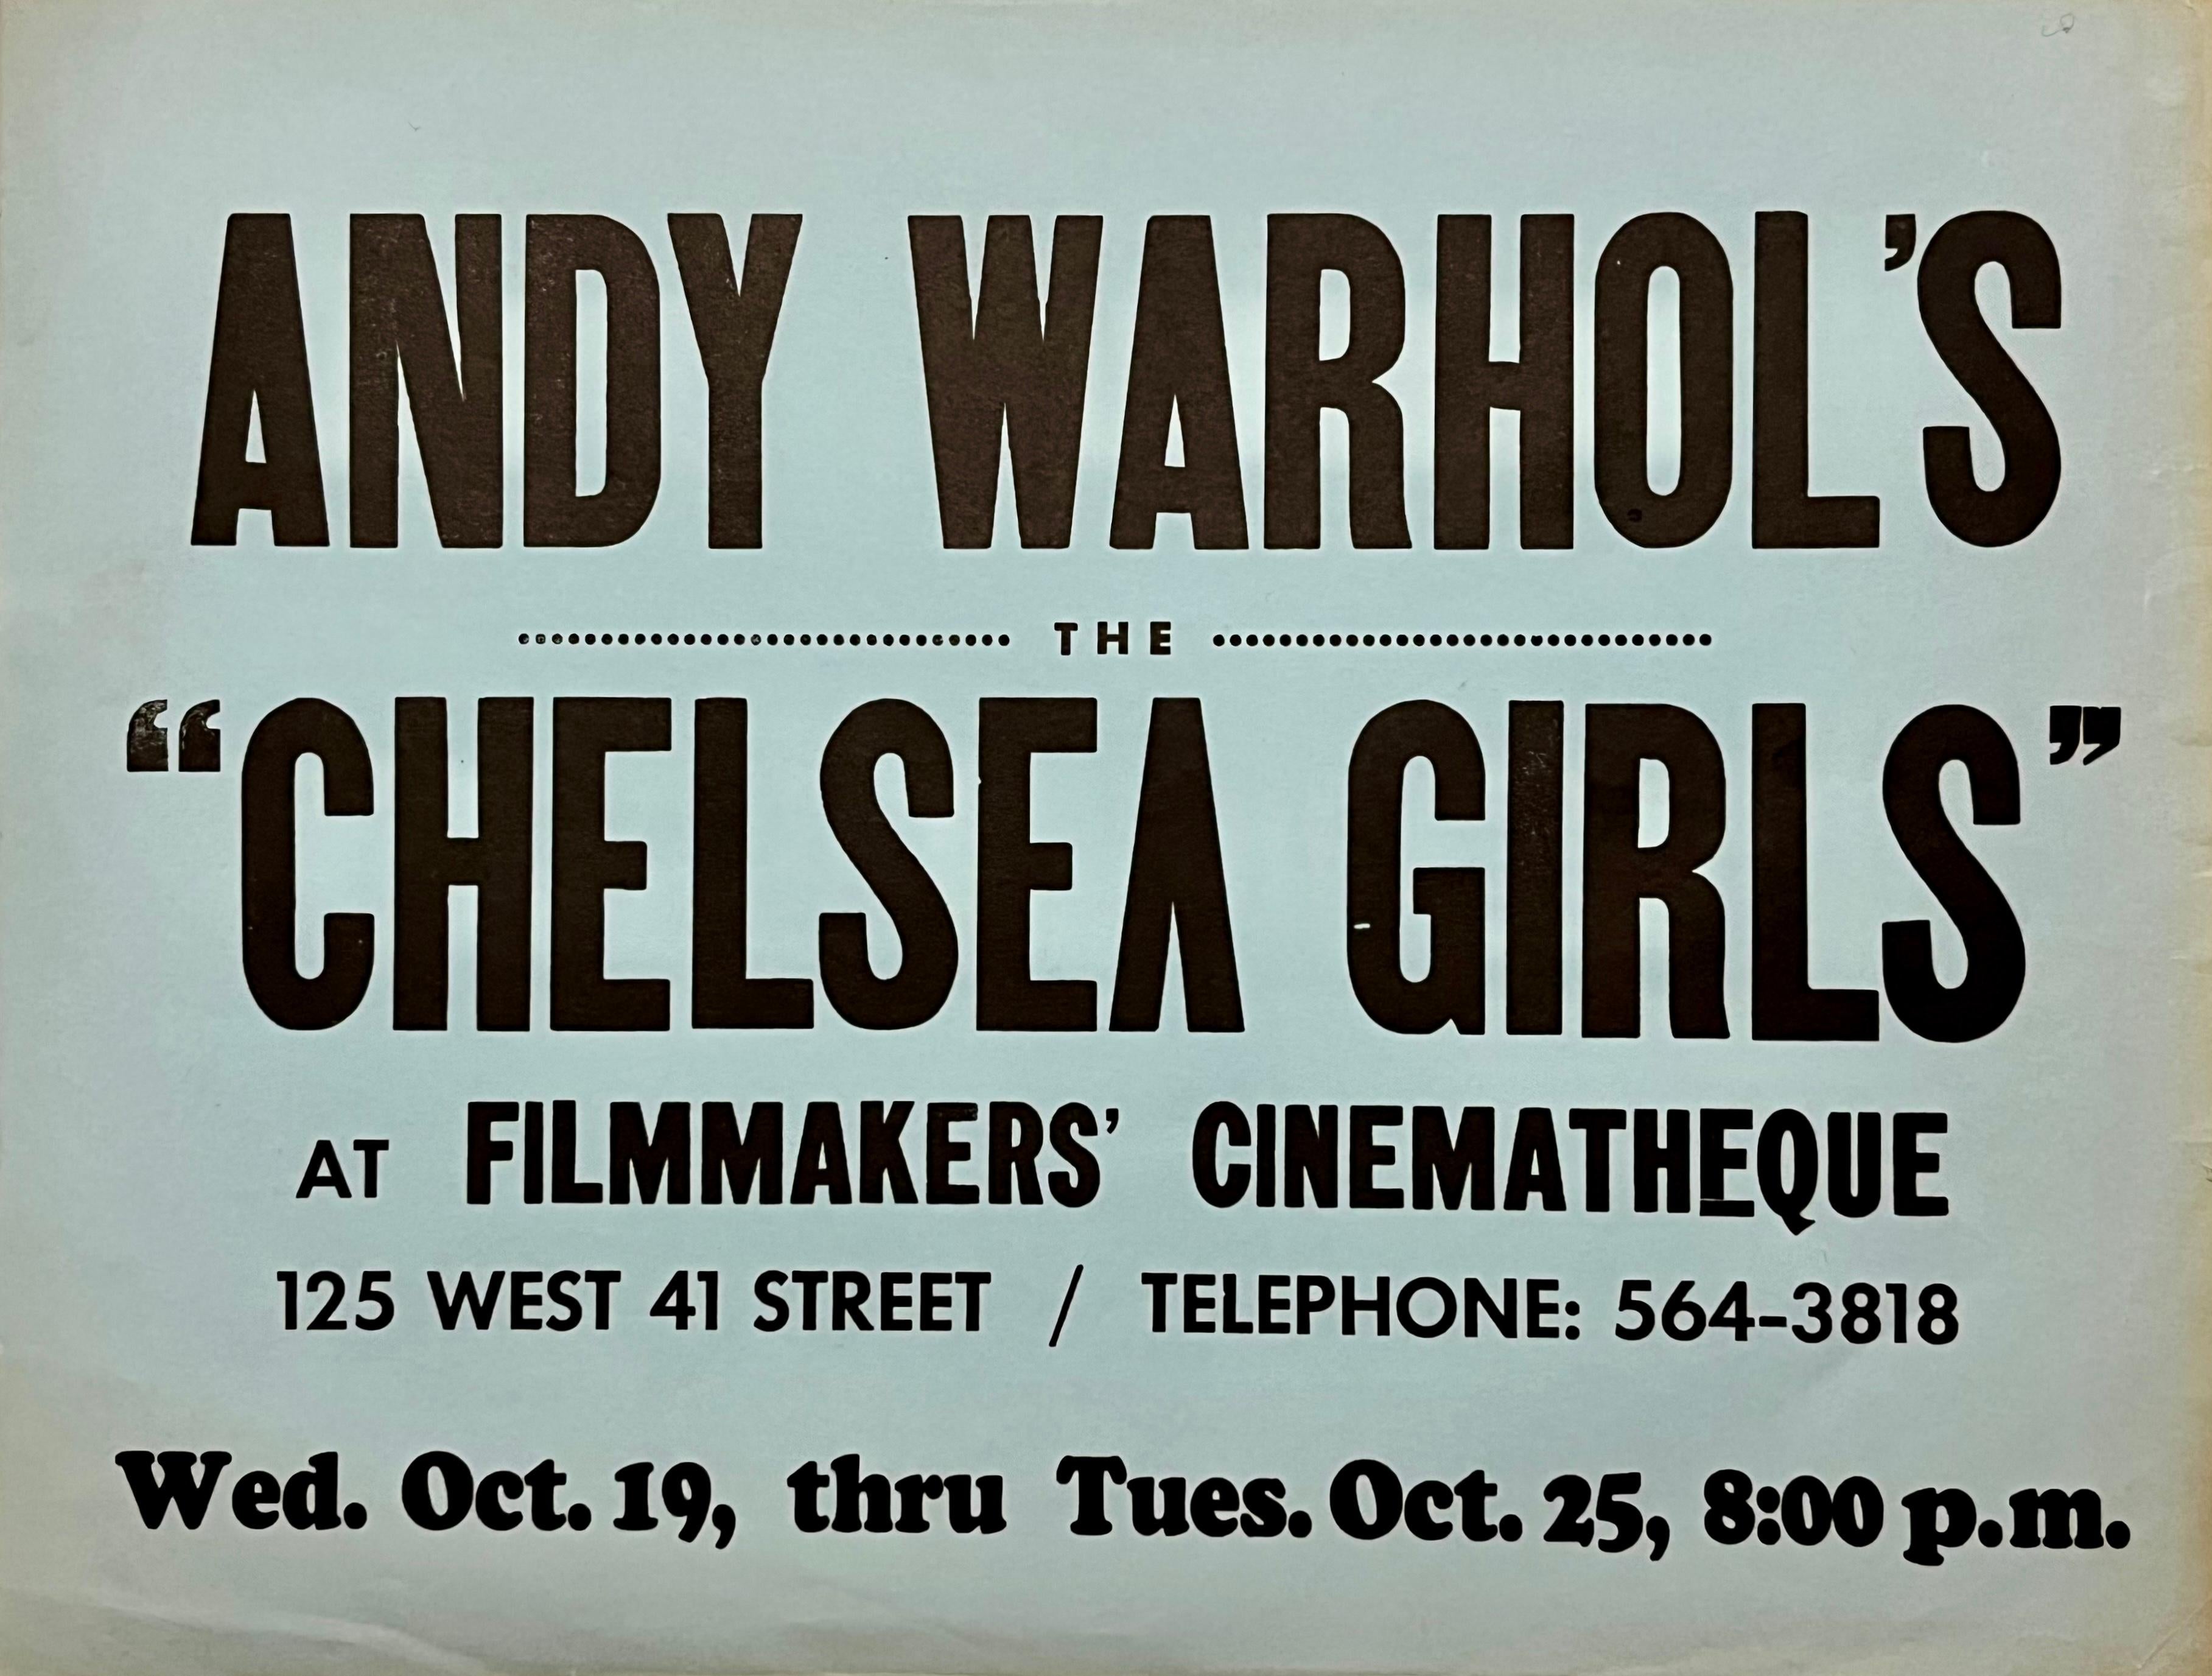 Andy Warhol Chelsea Girls 1966 (announcement) - Pop Art Art by (after) Andy Warhol